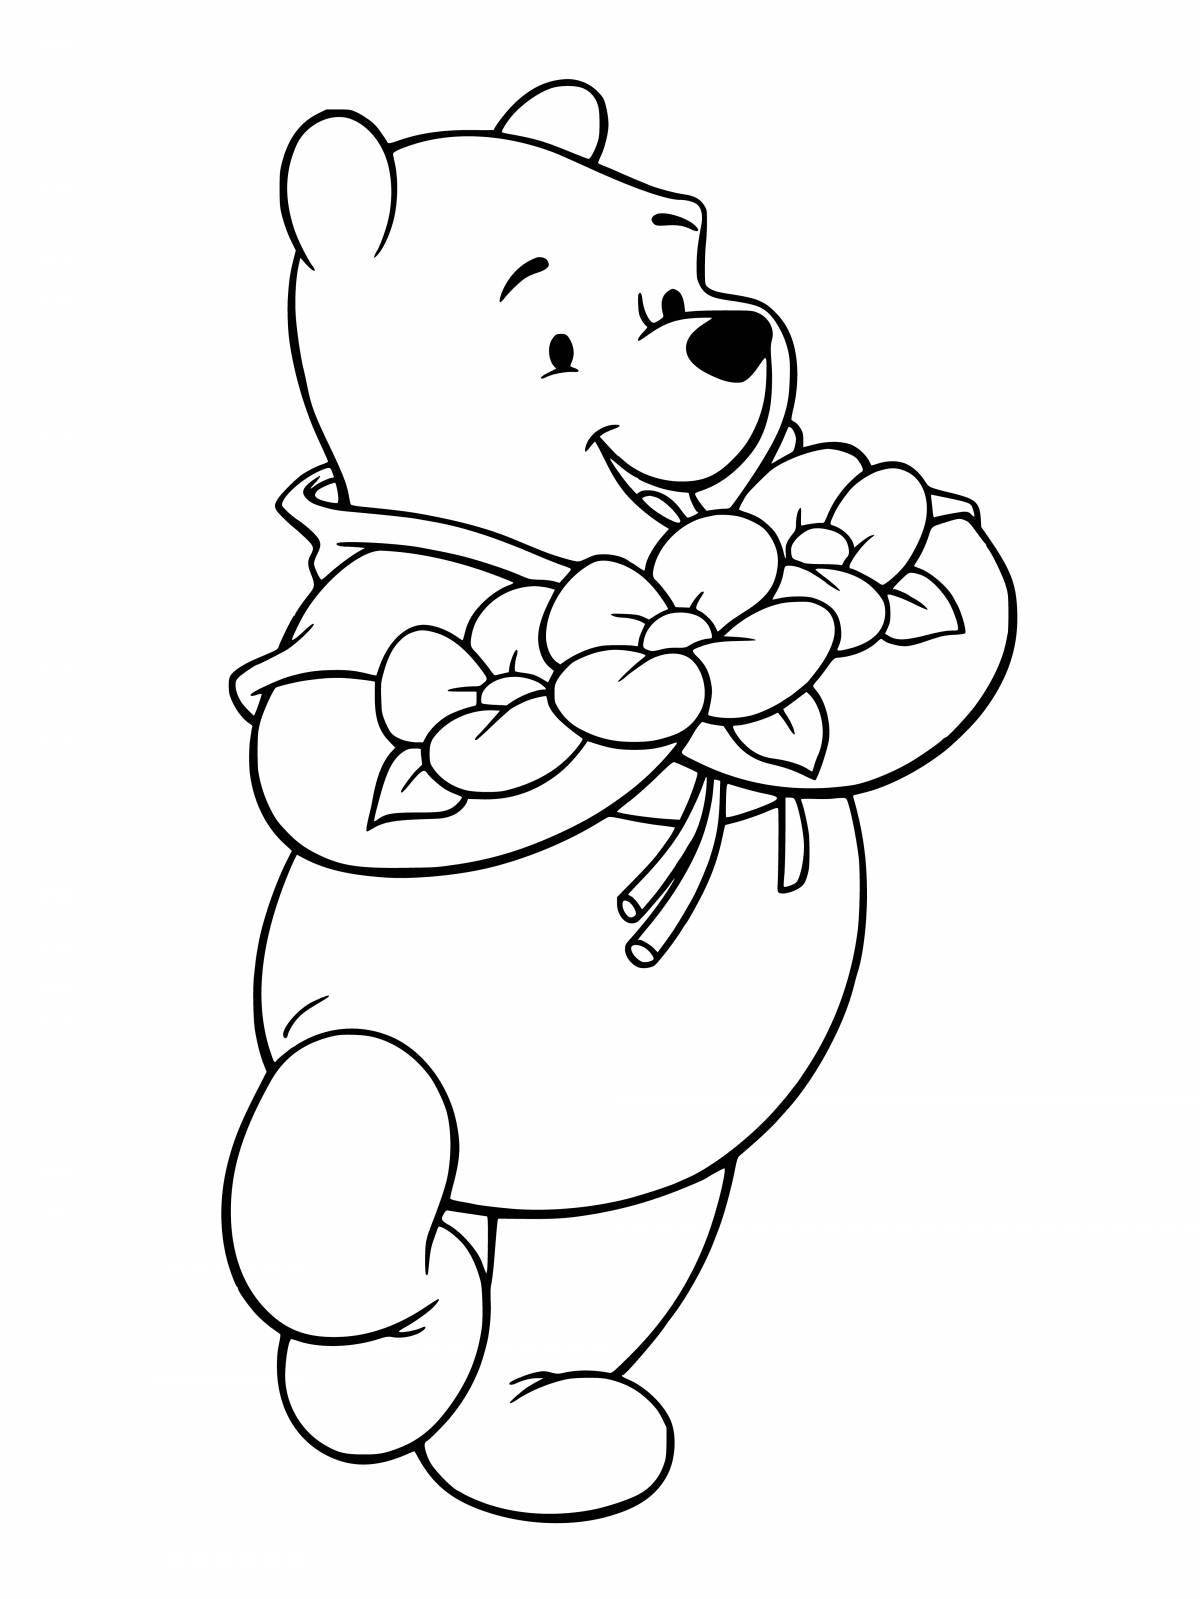 Coloring book playful winnie the pooh